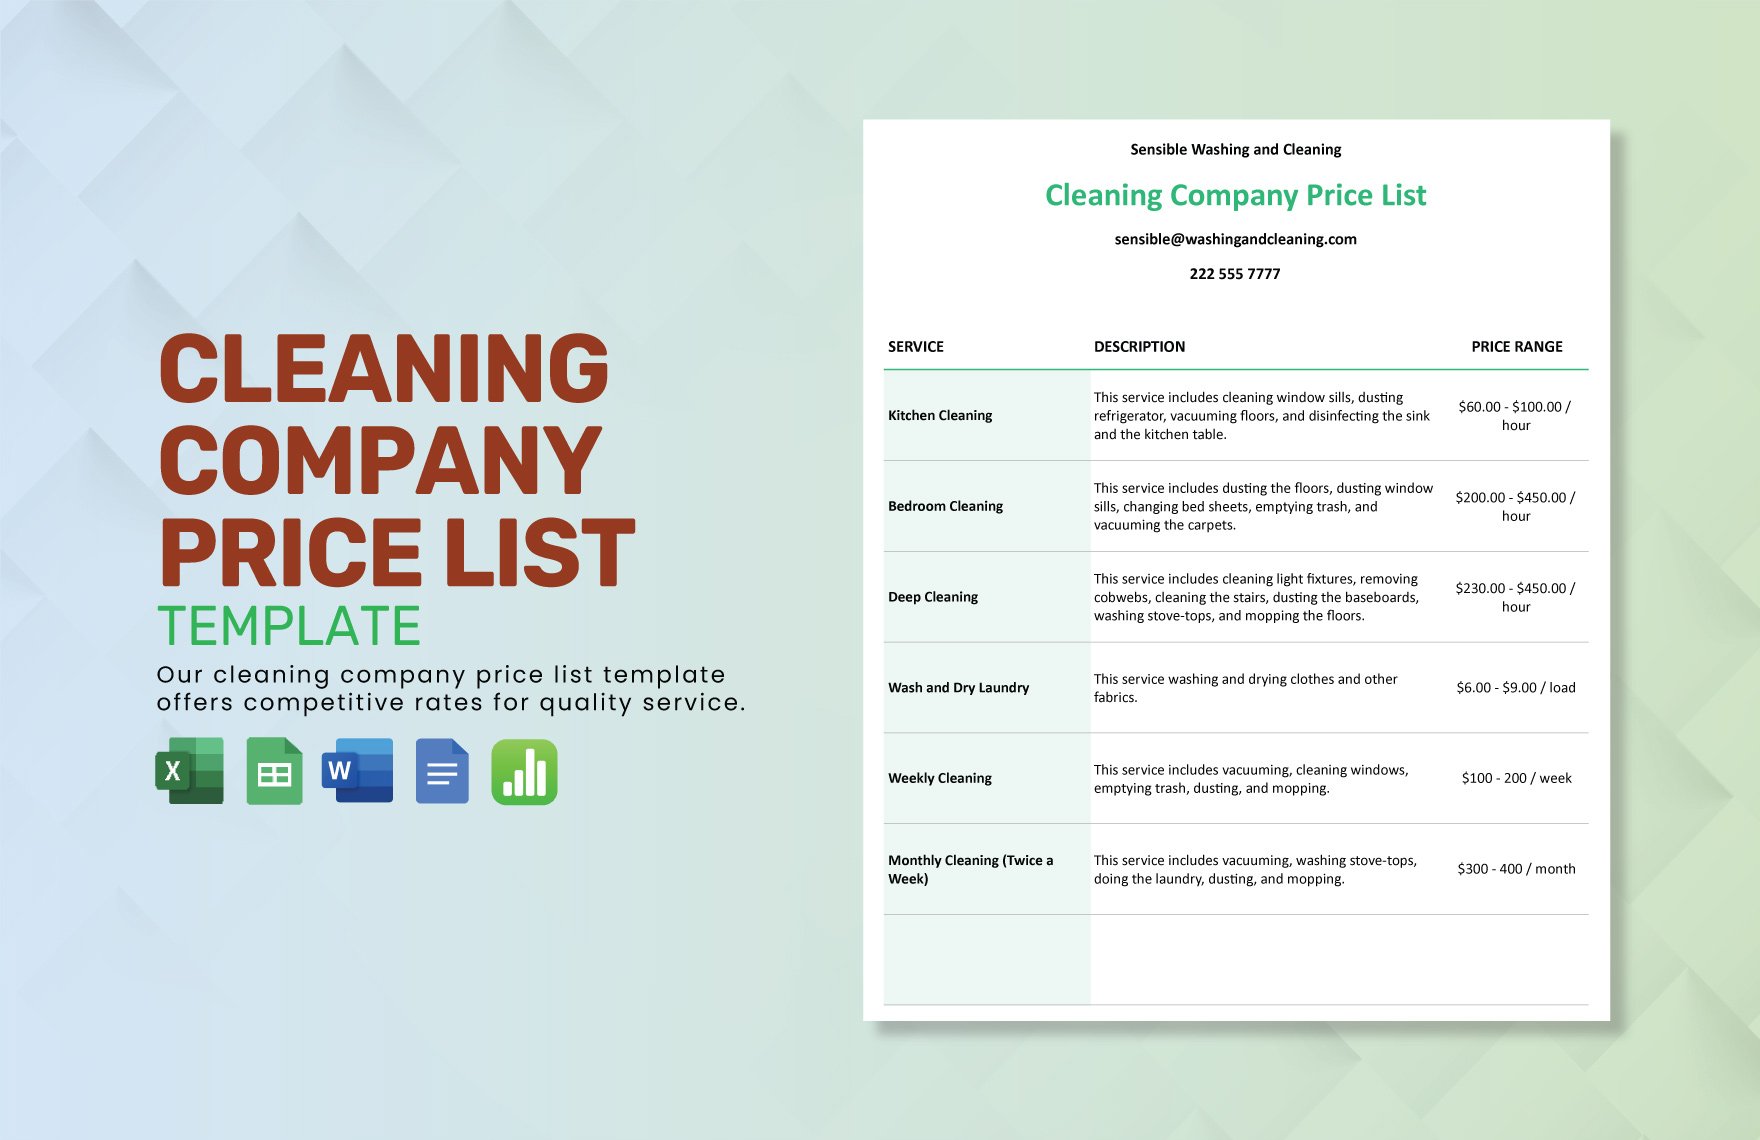 Cleaning Company Price List Template in Word, Google Docs, Excel, Google Sheets, Apple Numbers